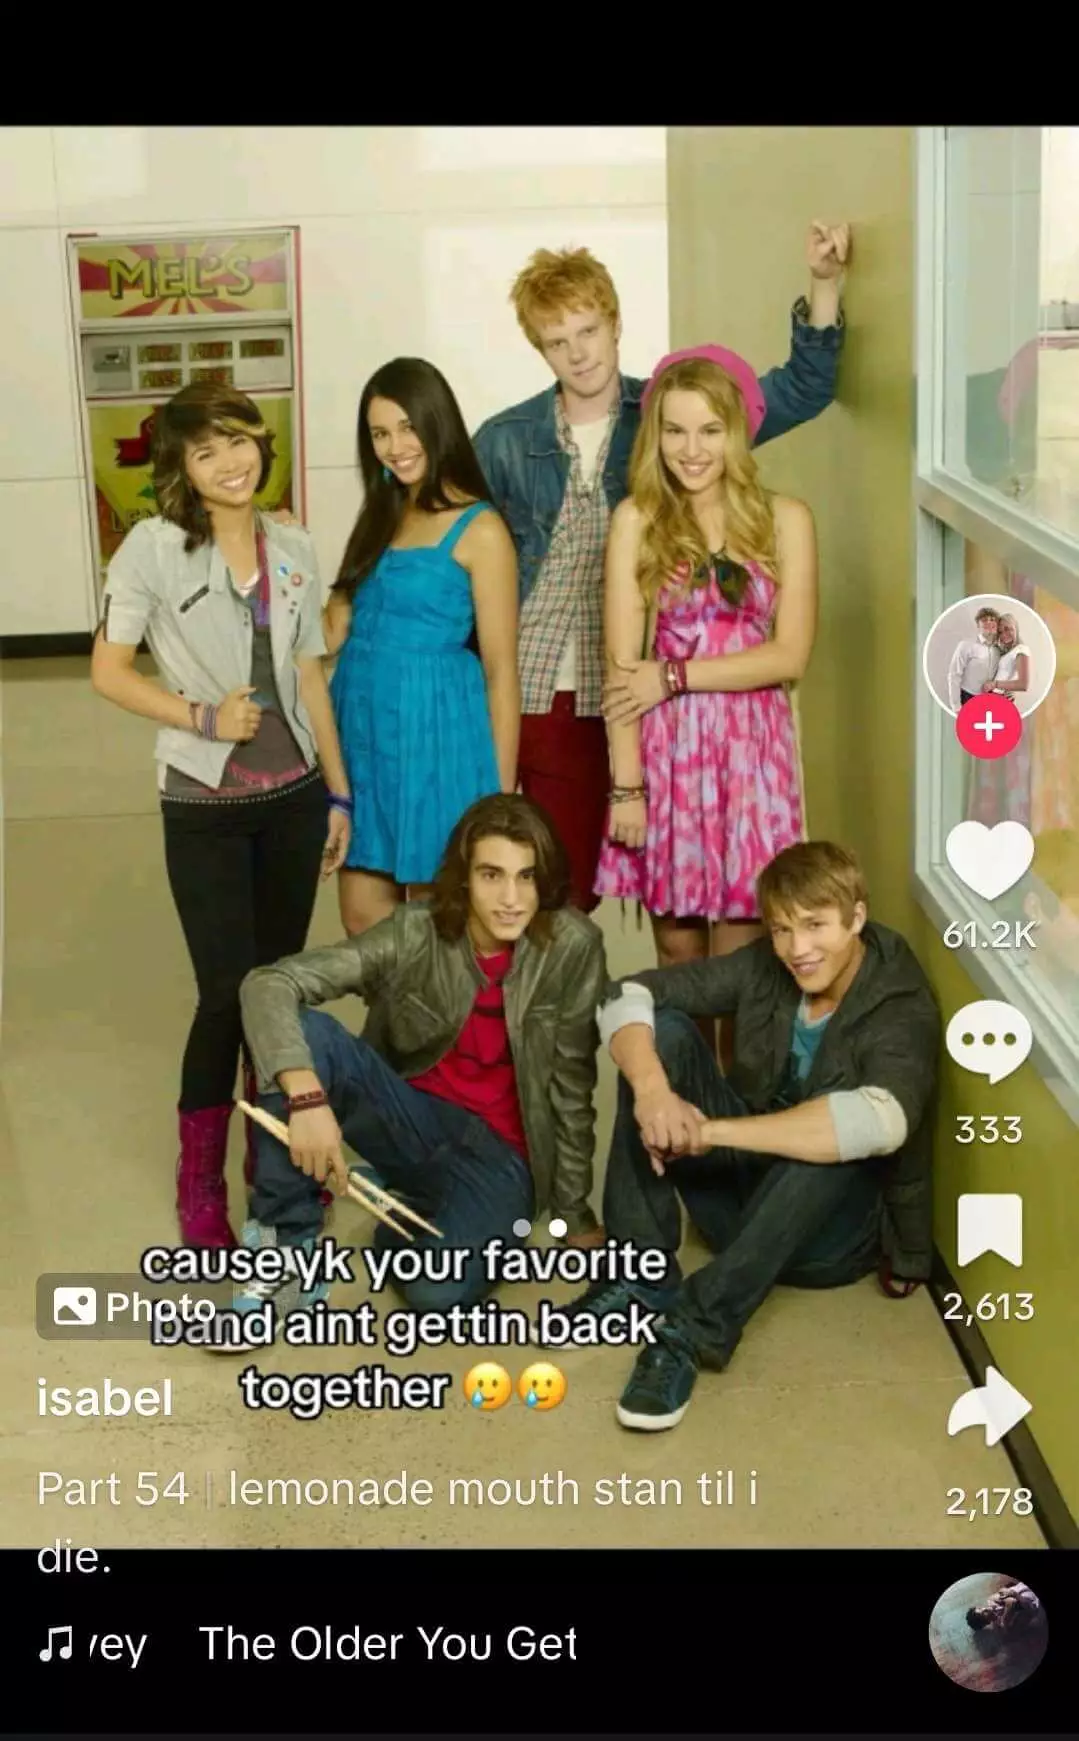 Group photo of six diverse young actors posing cheerfully in a school hallway, representing characters from the movie "Lemonade Mouth."